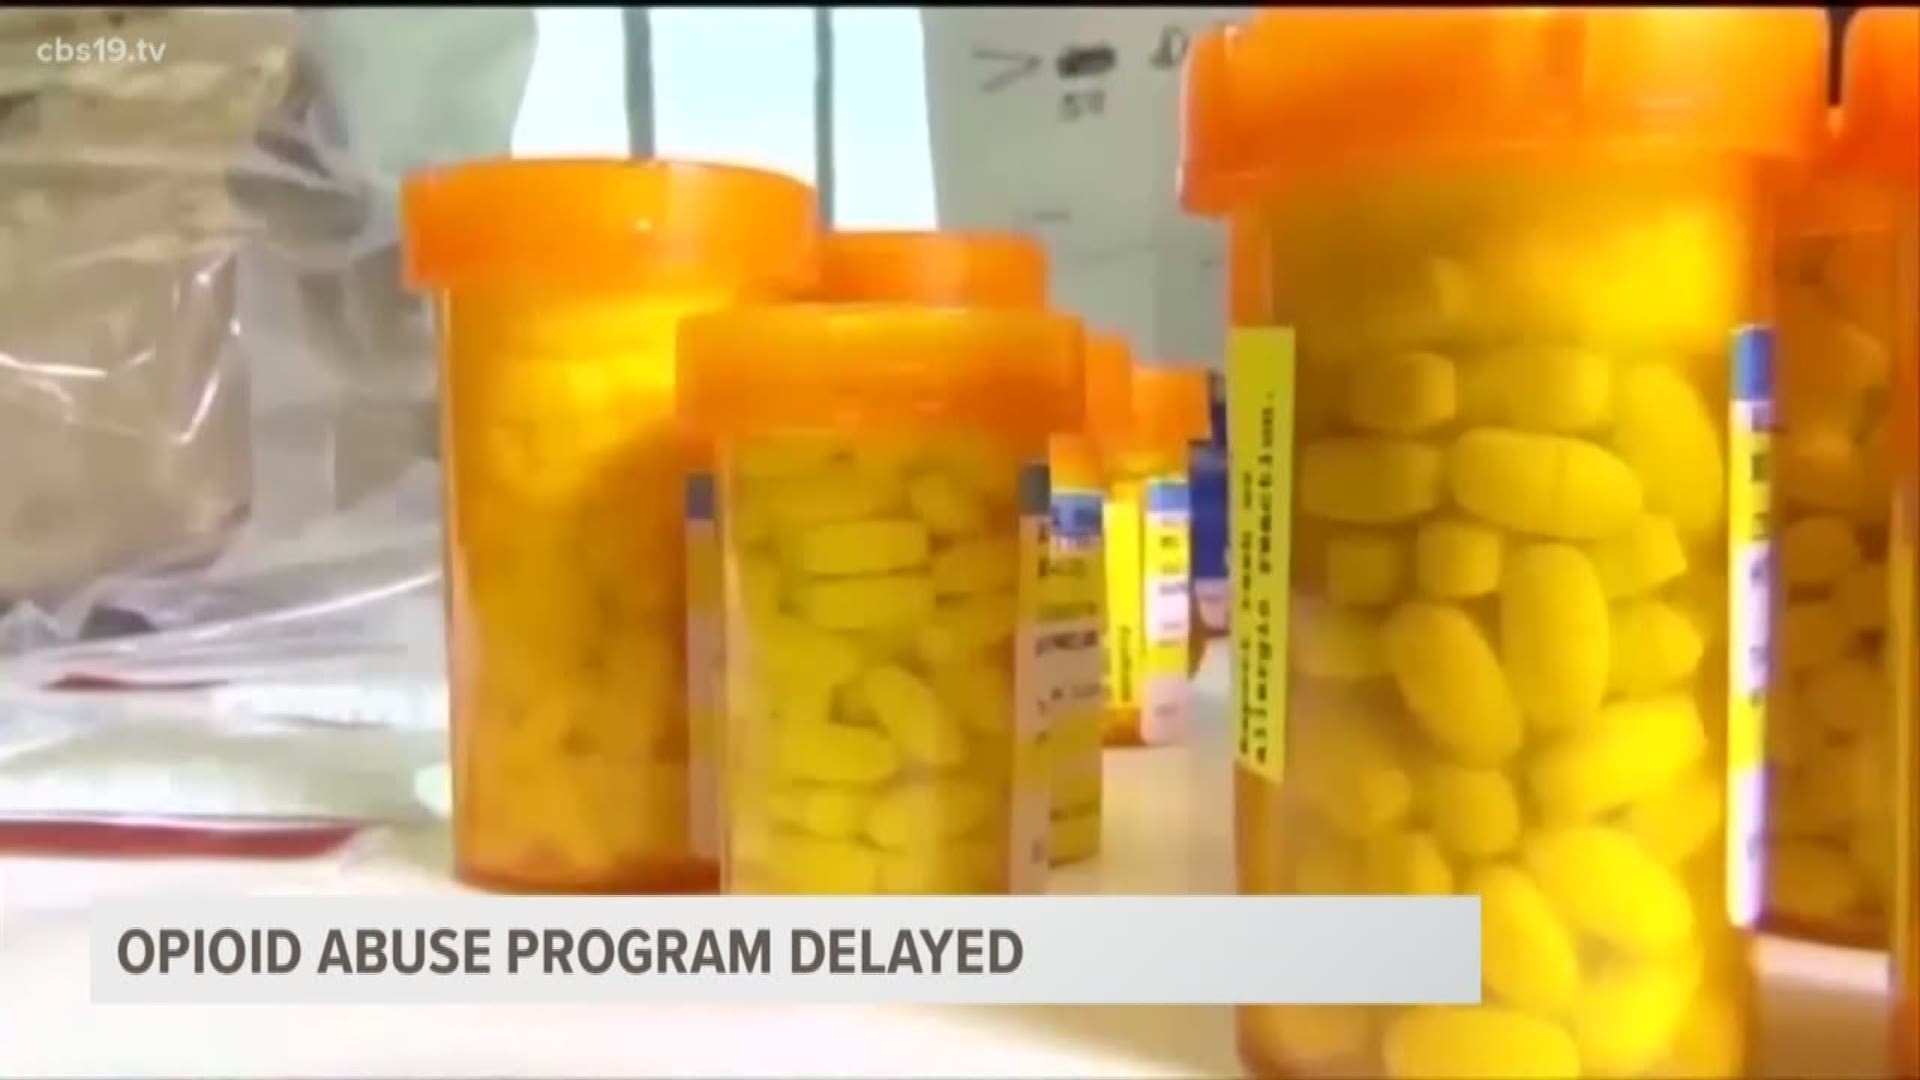 The program is delayed to allow more time for physicians to comply with the database.